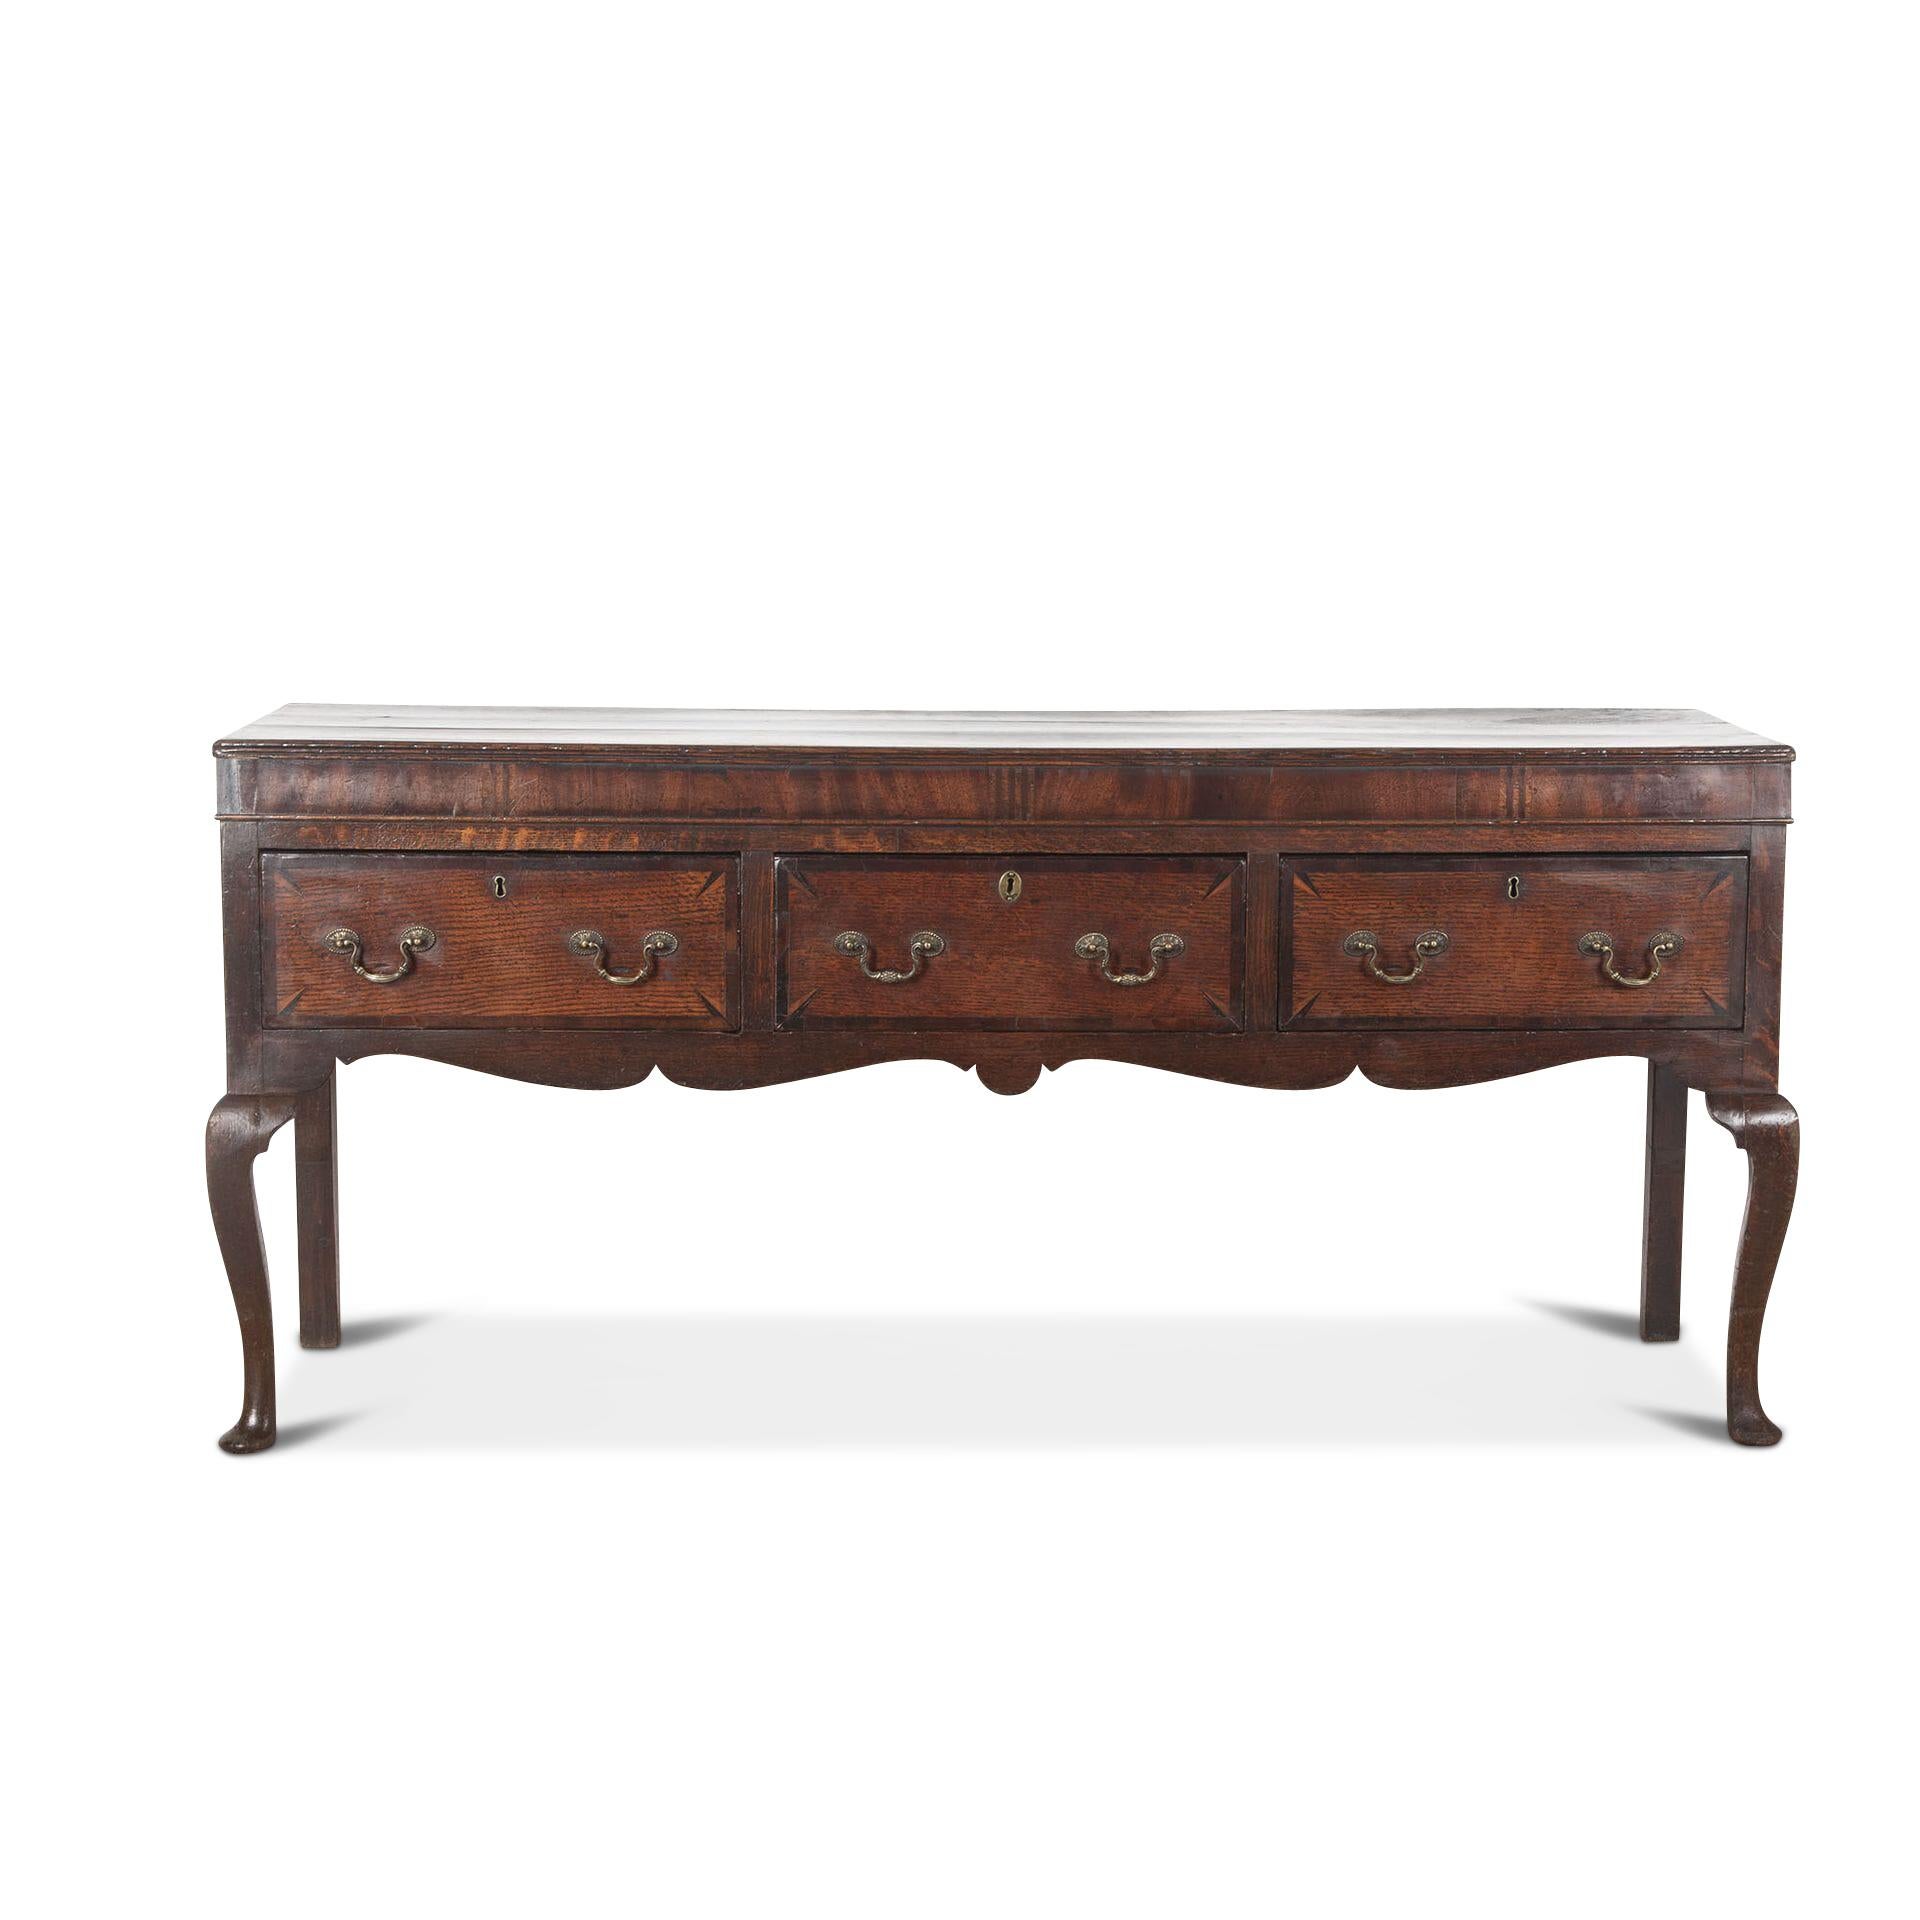 18th Century oak dresser, the moulded top with a mahogany inlaid frieze above three mahogany crossbanded drawers with brass swan neck handles and a shaped apron below, raised on cabriole legs with pad feet. In good condition and colour. Circa